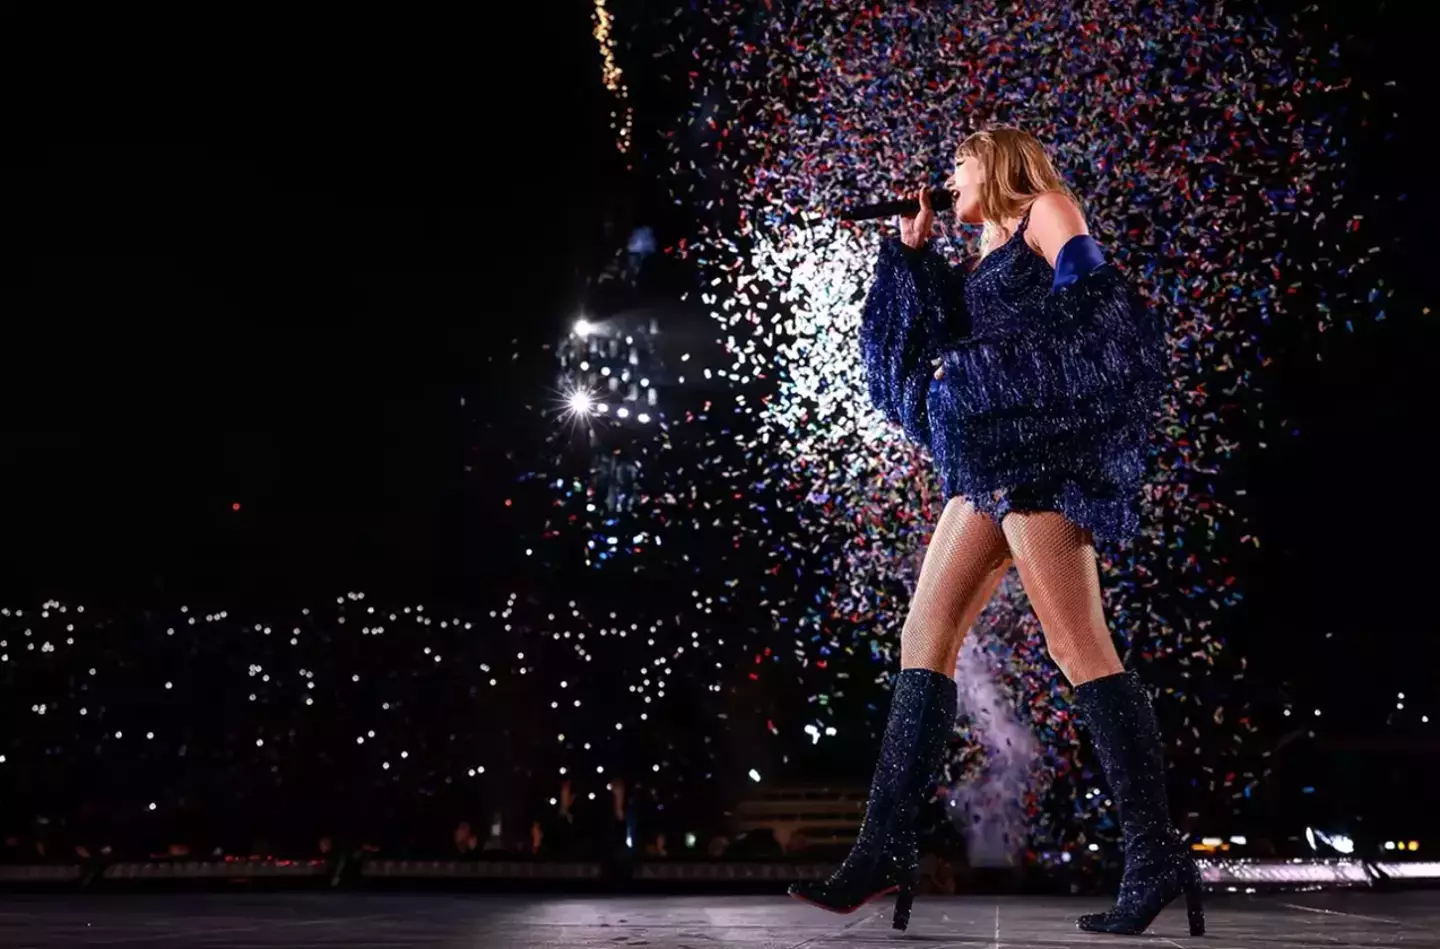 A fan has tragically died before a Taylor Swift concert.